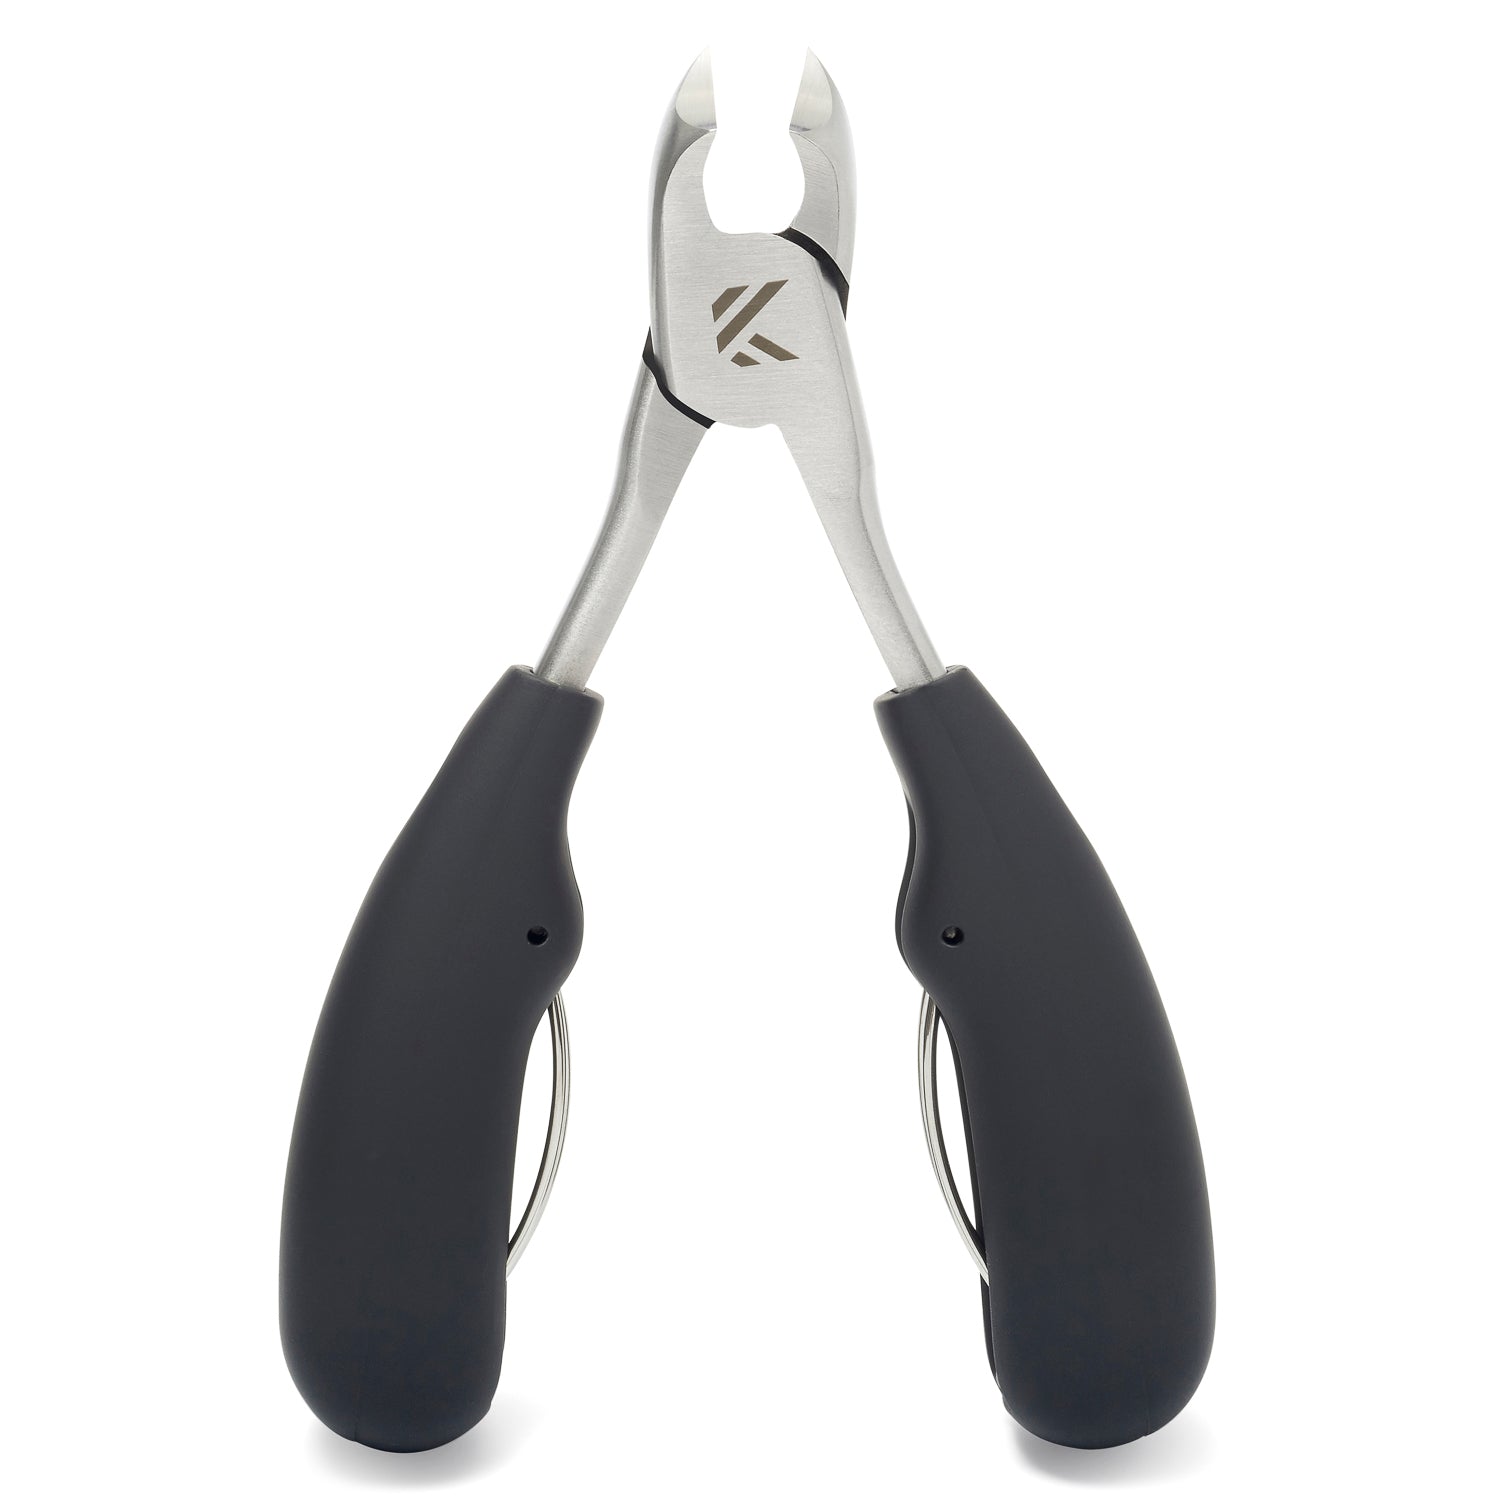 Toe Nail Clippers Podiatrist Toenail Clippers for Thick Nails for